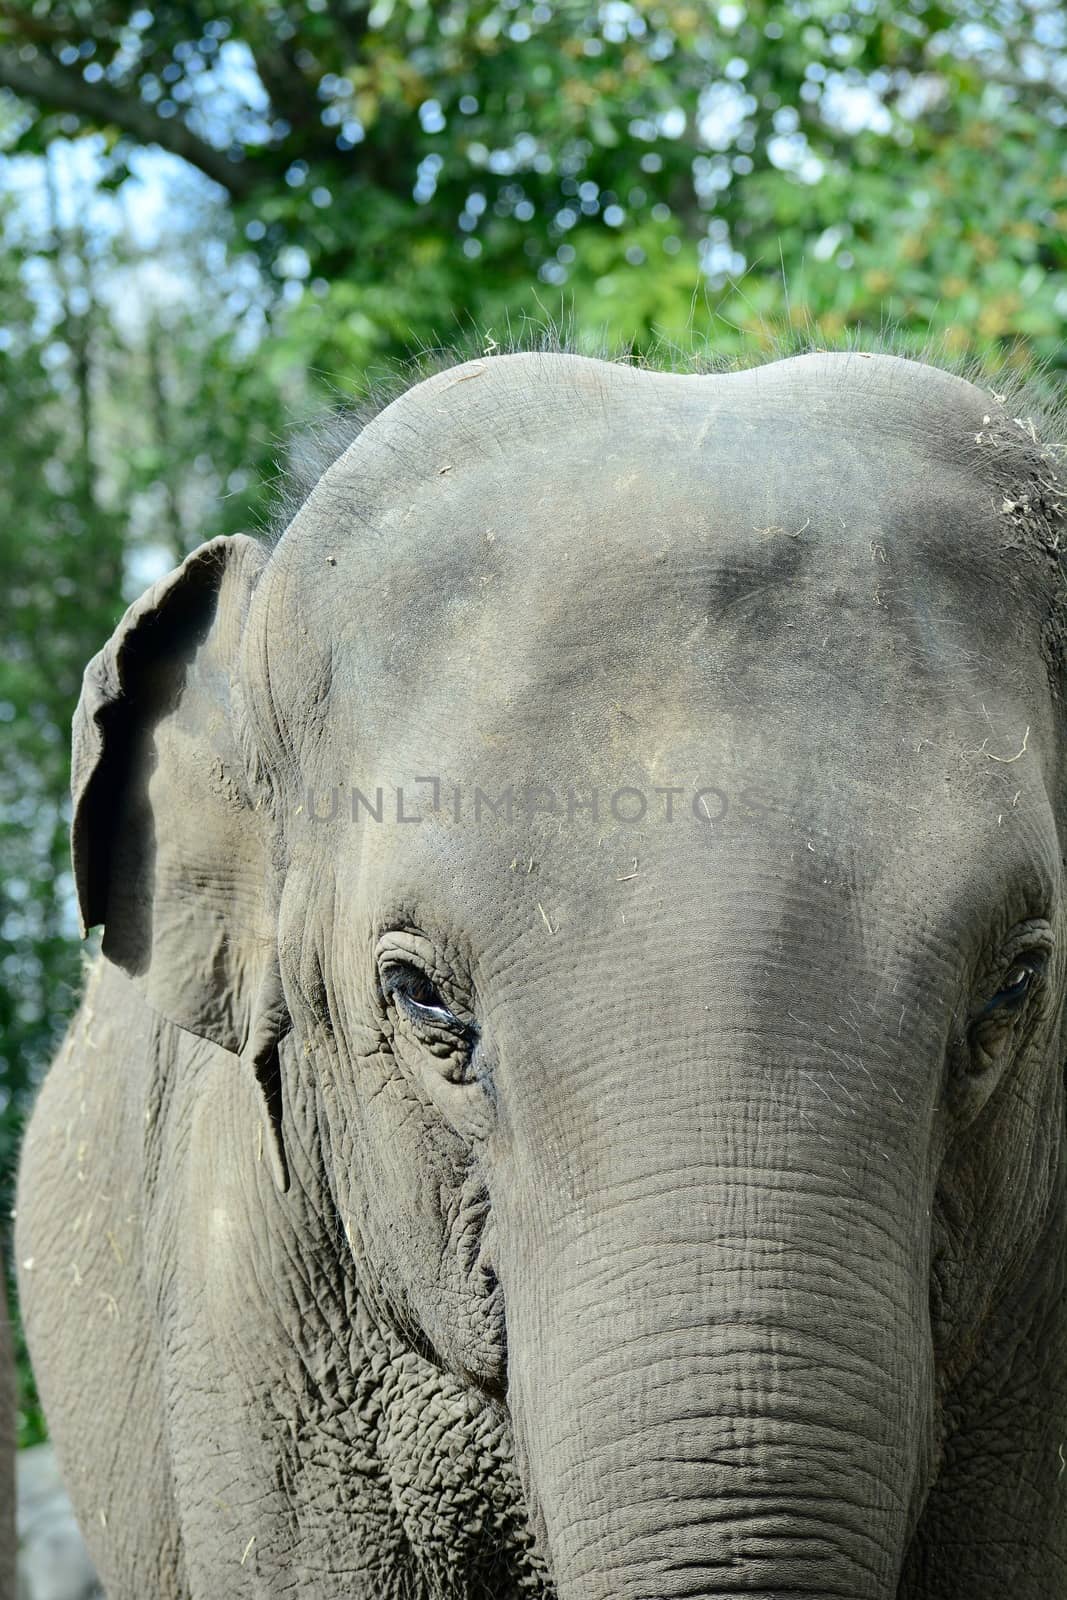 The Asian elephant is the largest living land animal in Asia